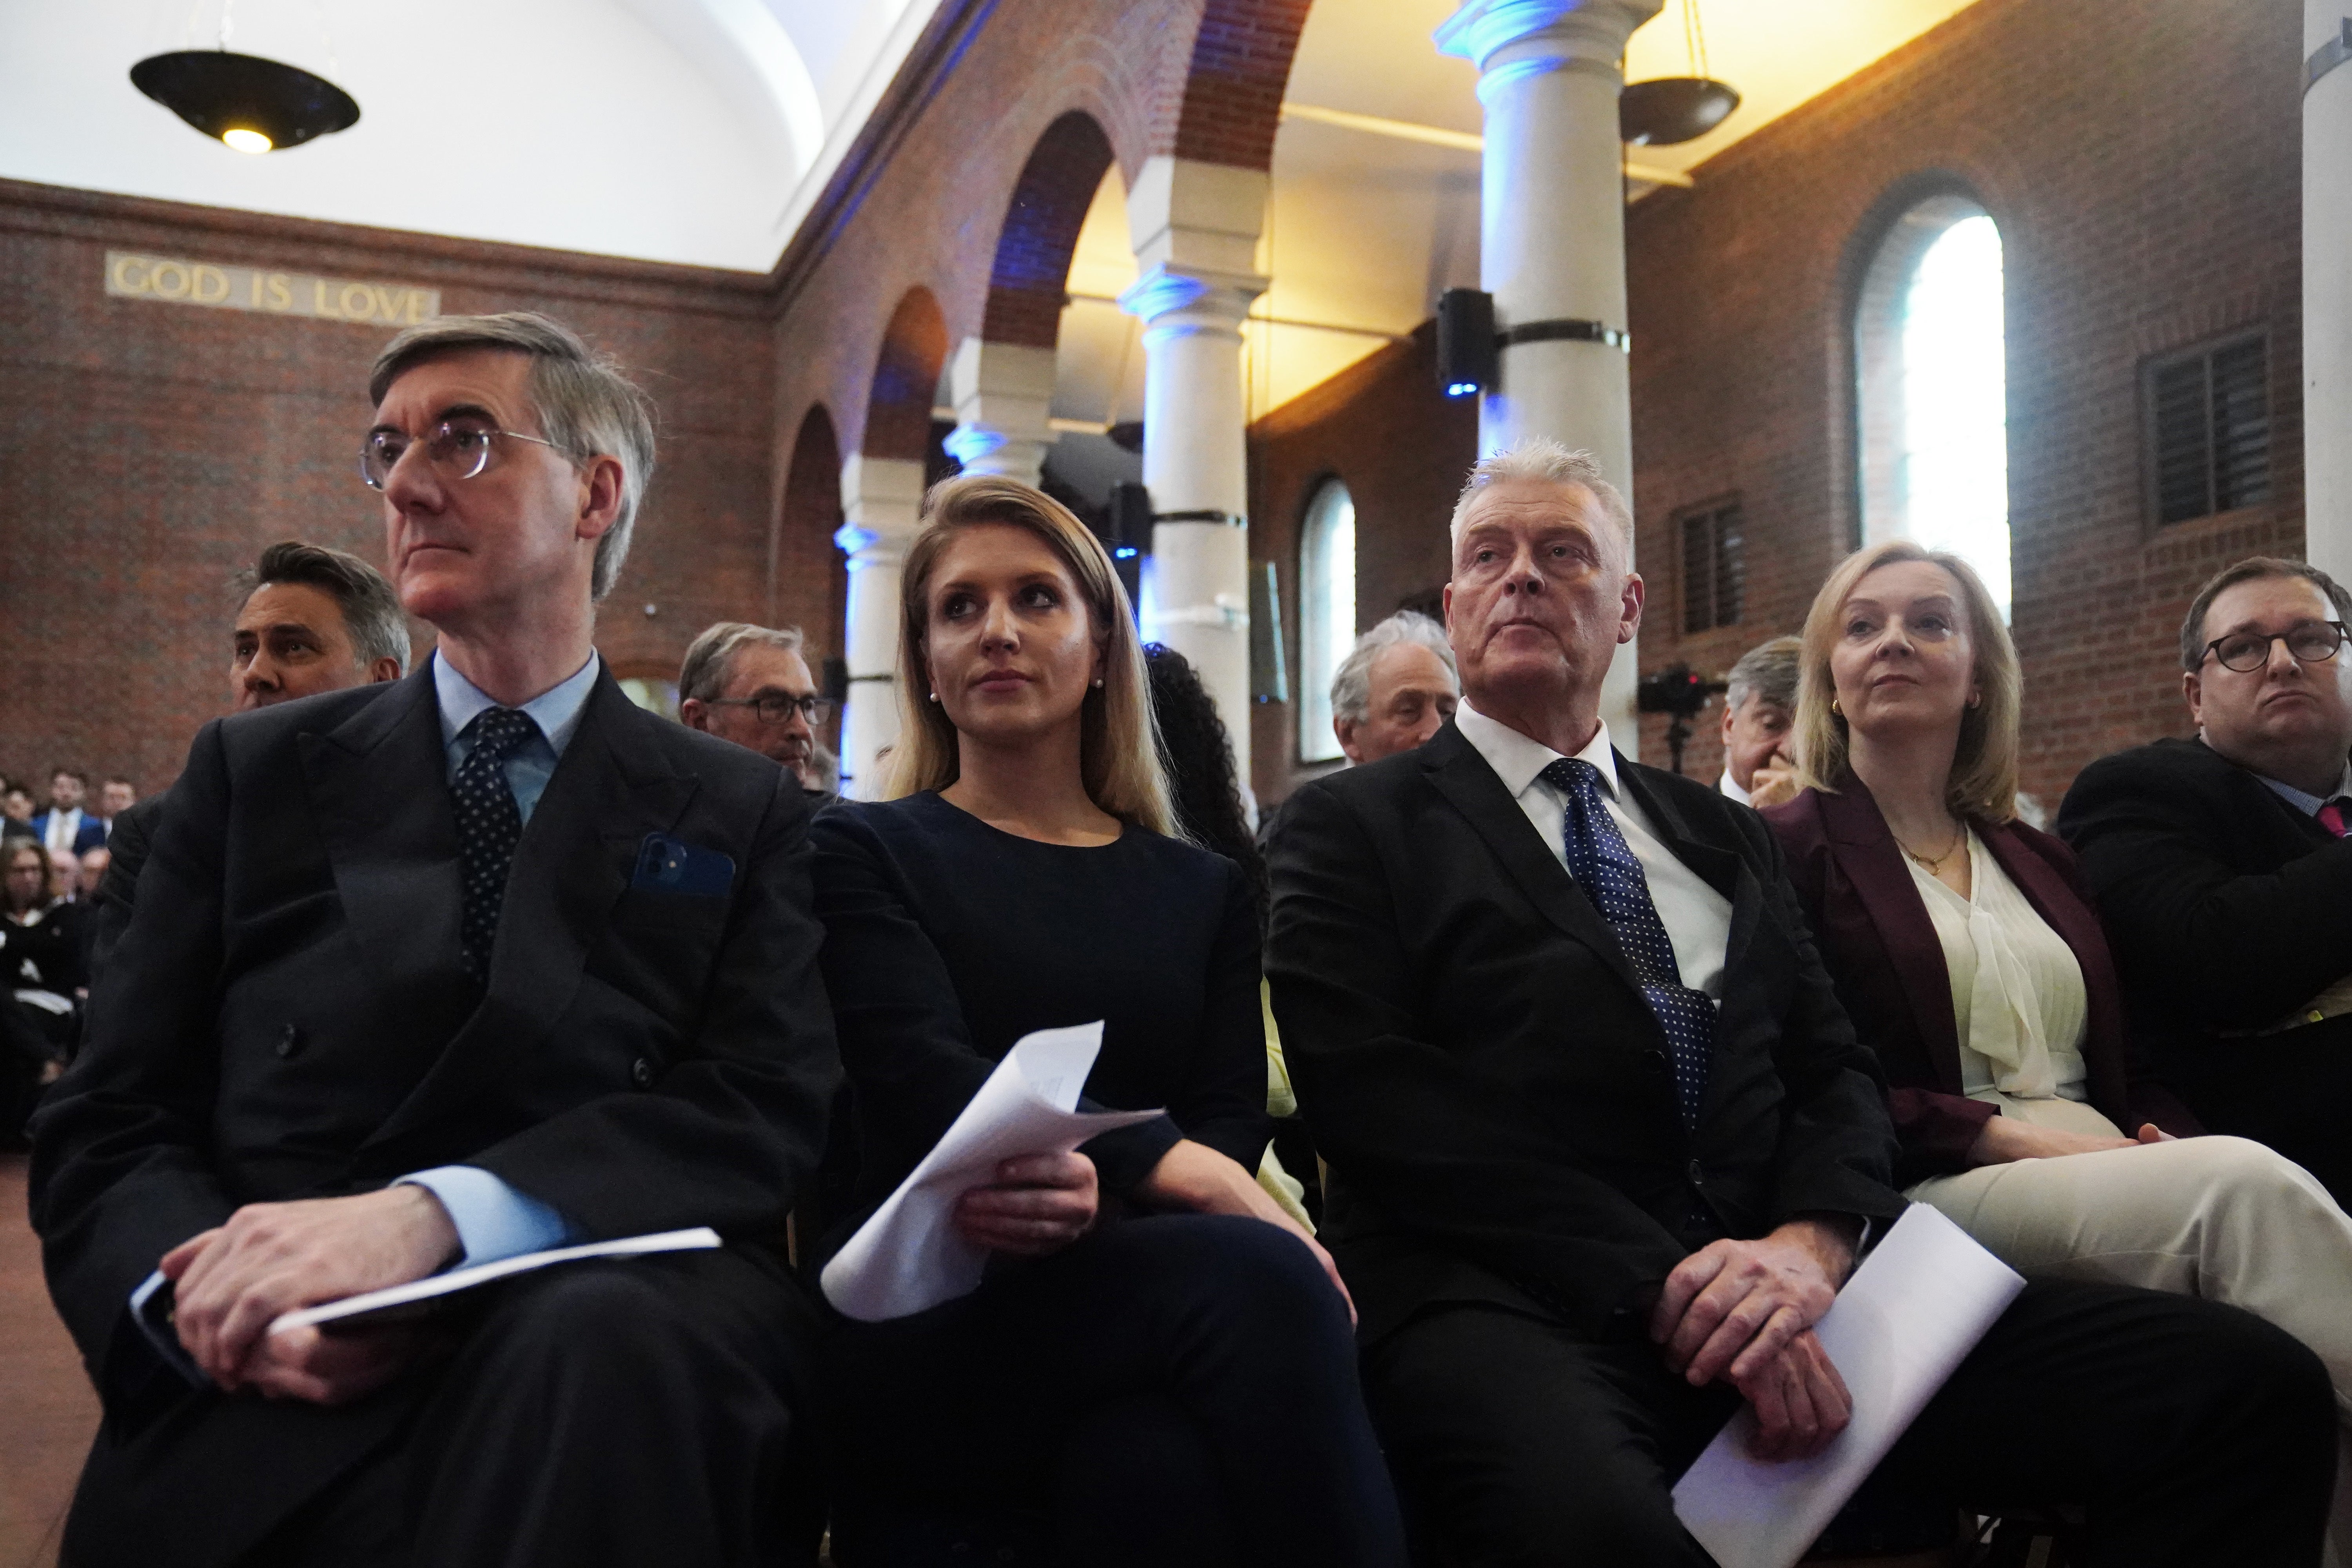 Sir Jacob Rees-Mogg, Mhairi Fraser, Lee Anderson and Liz Truss